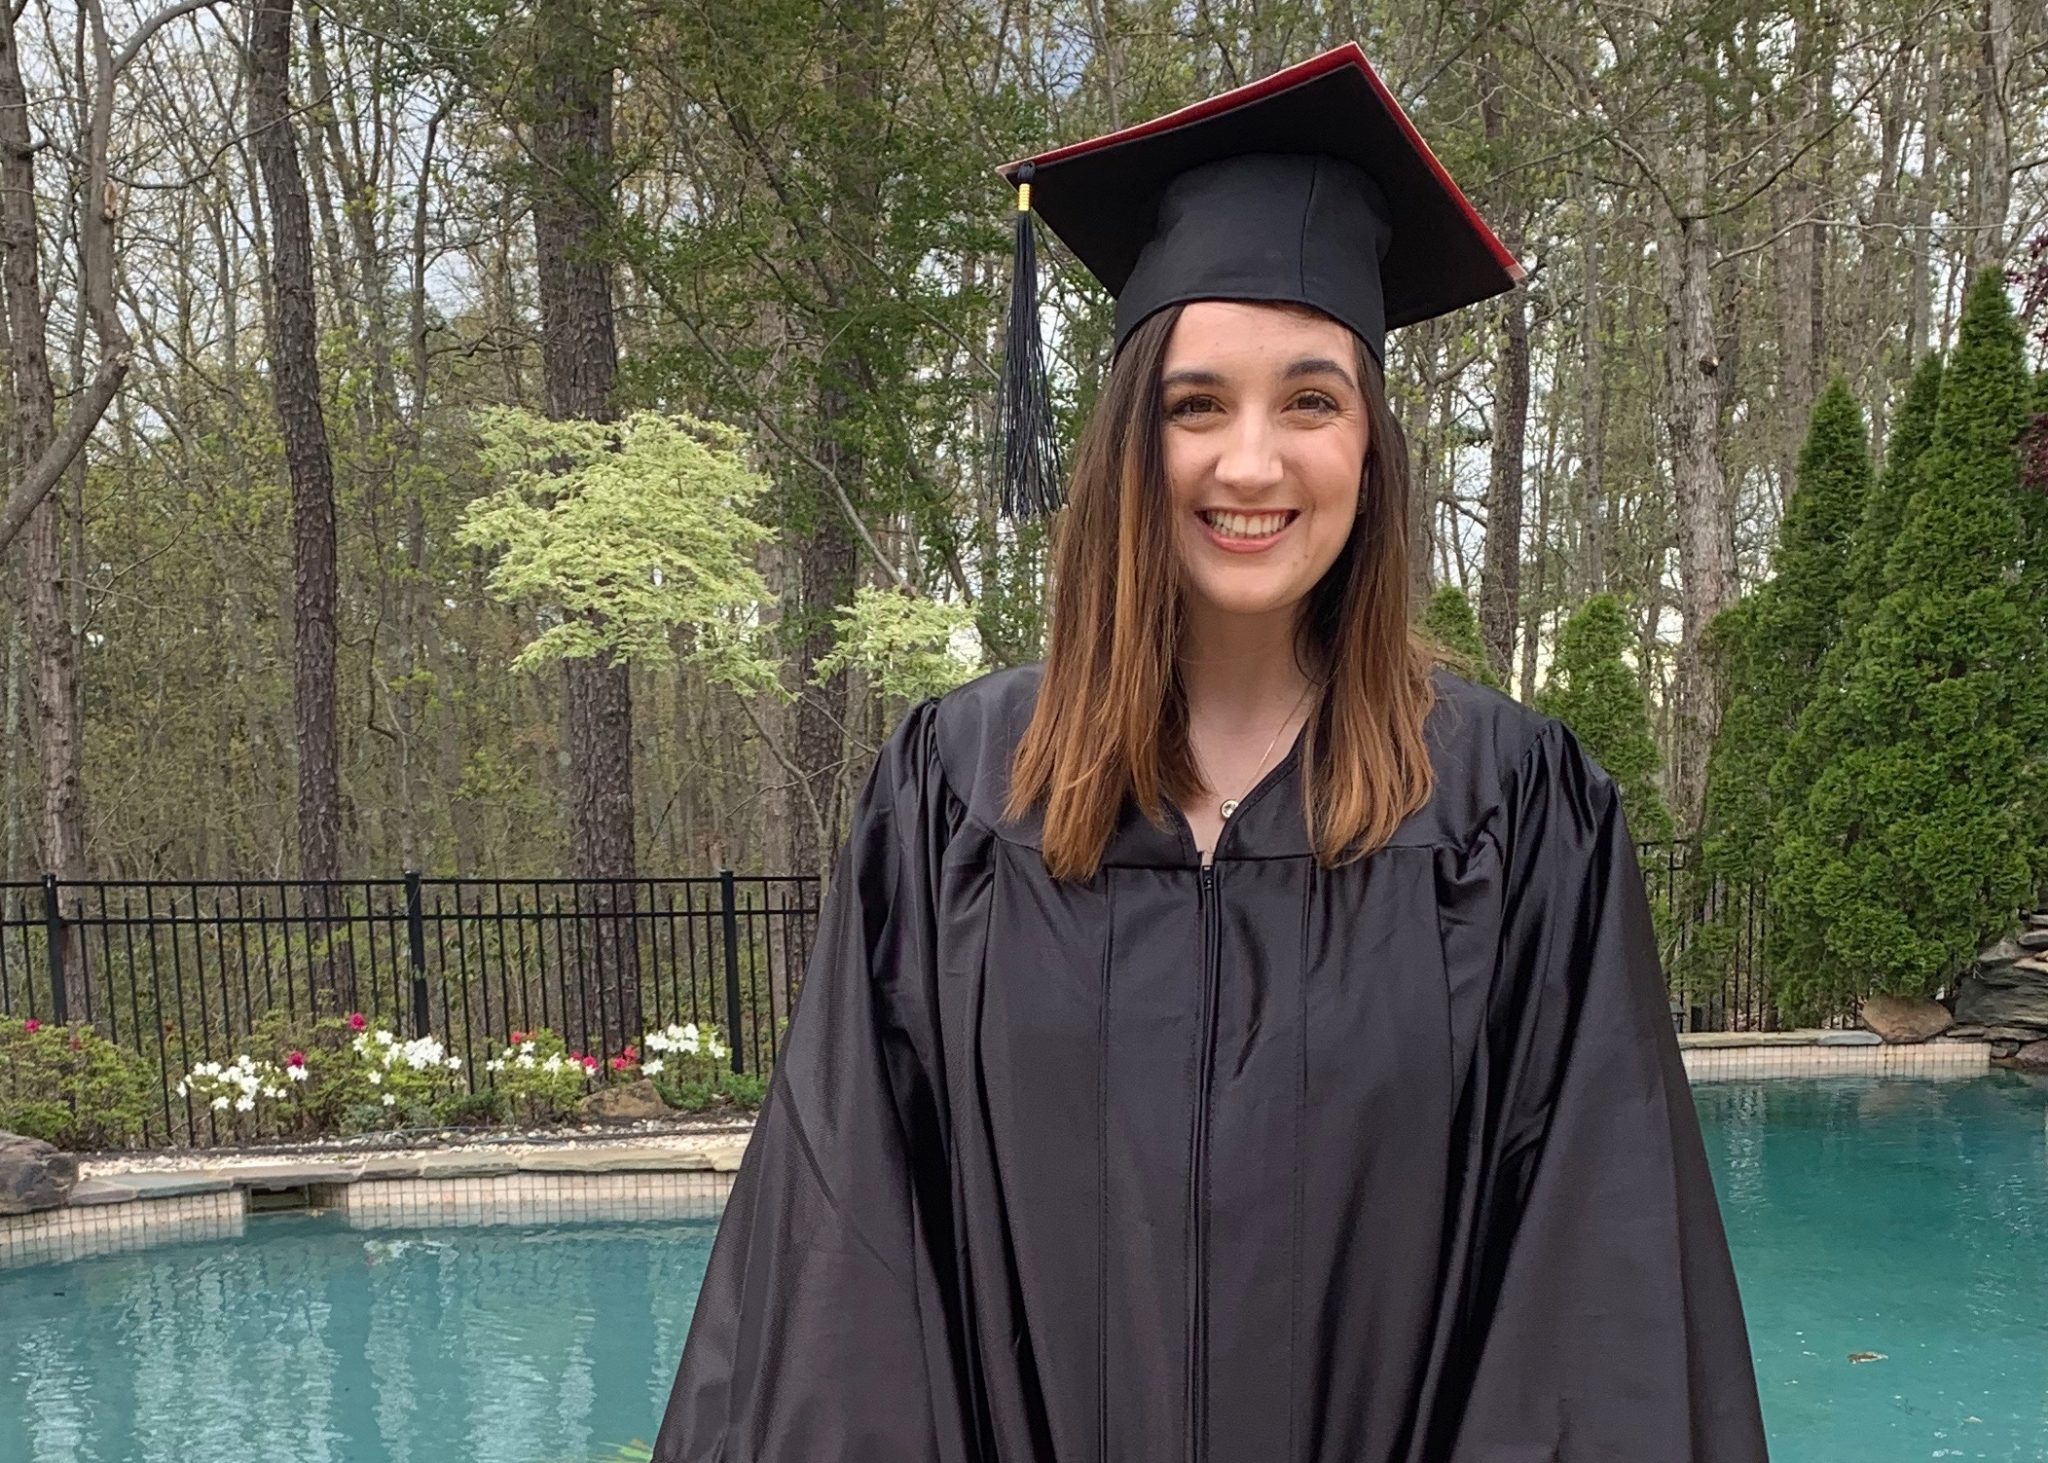 Photo of Brianna Giarraputo in cap and gown